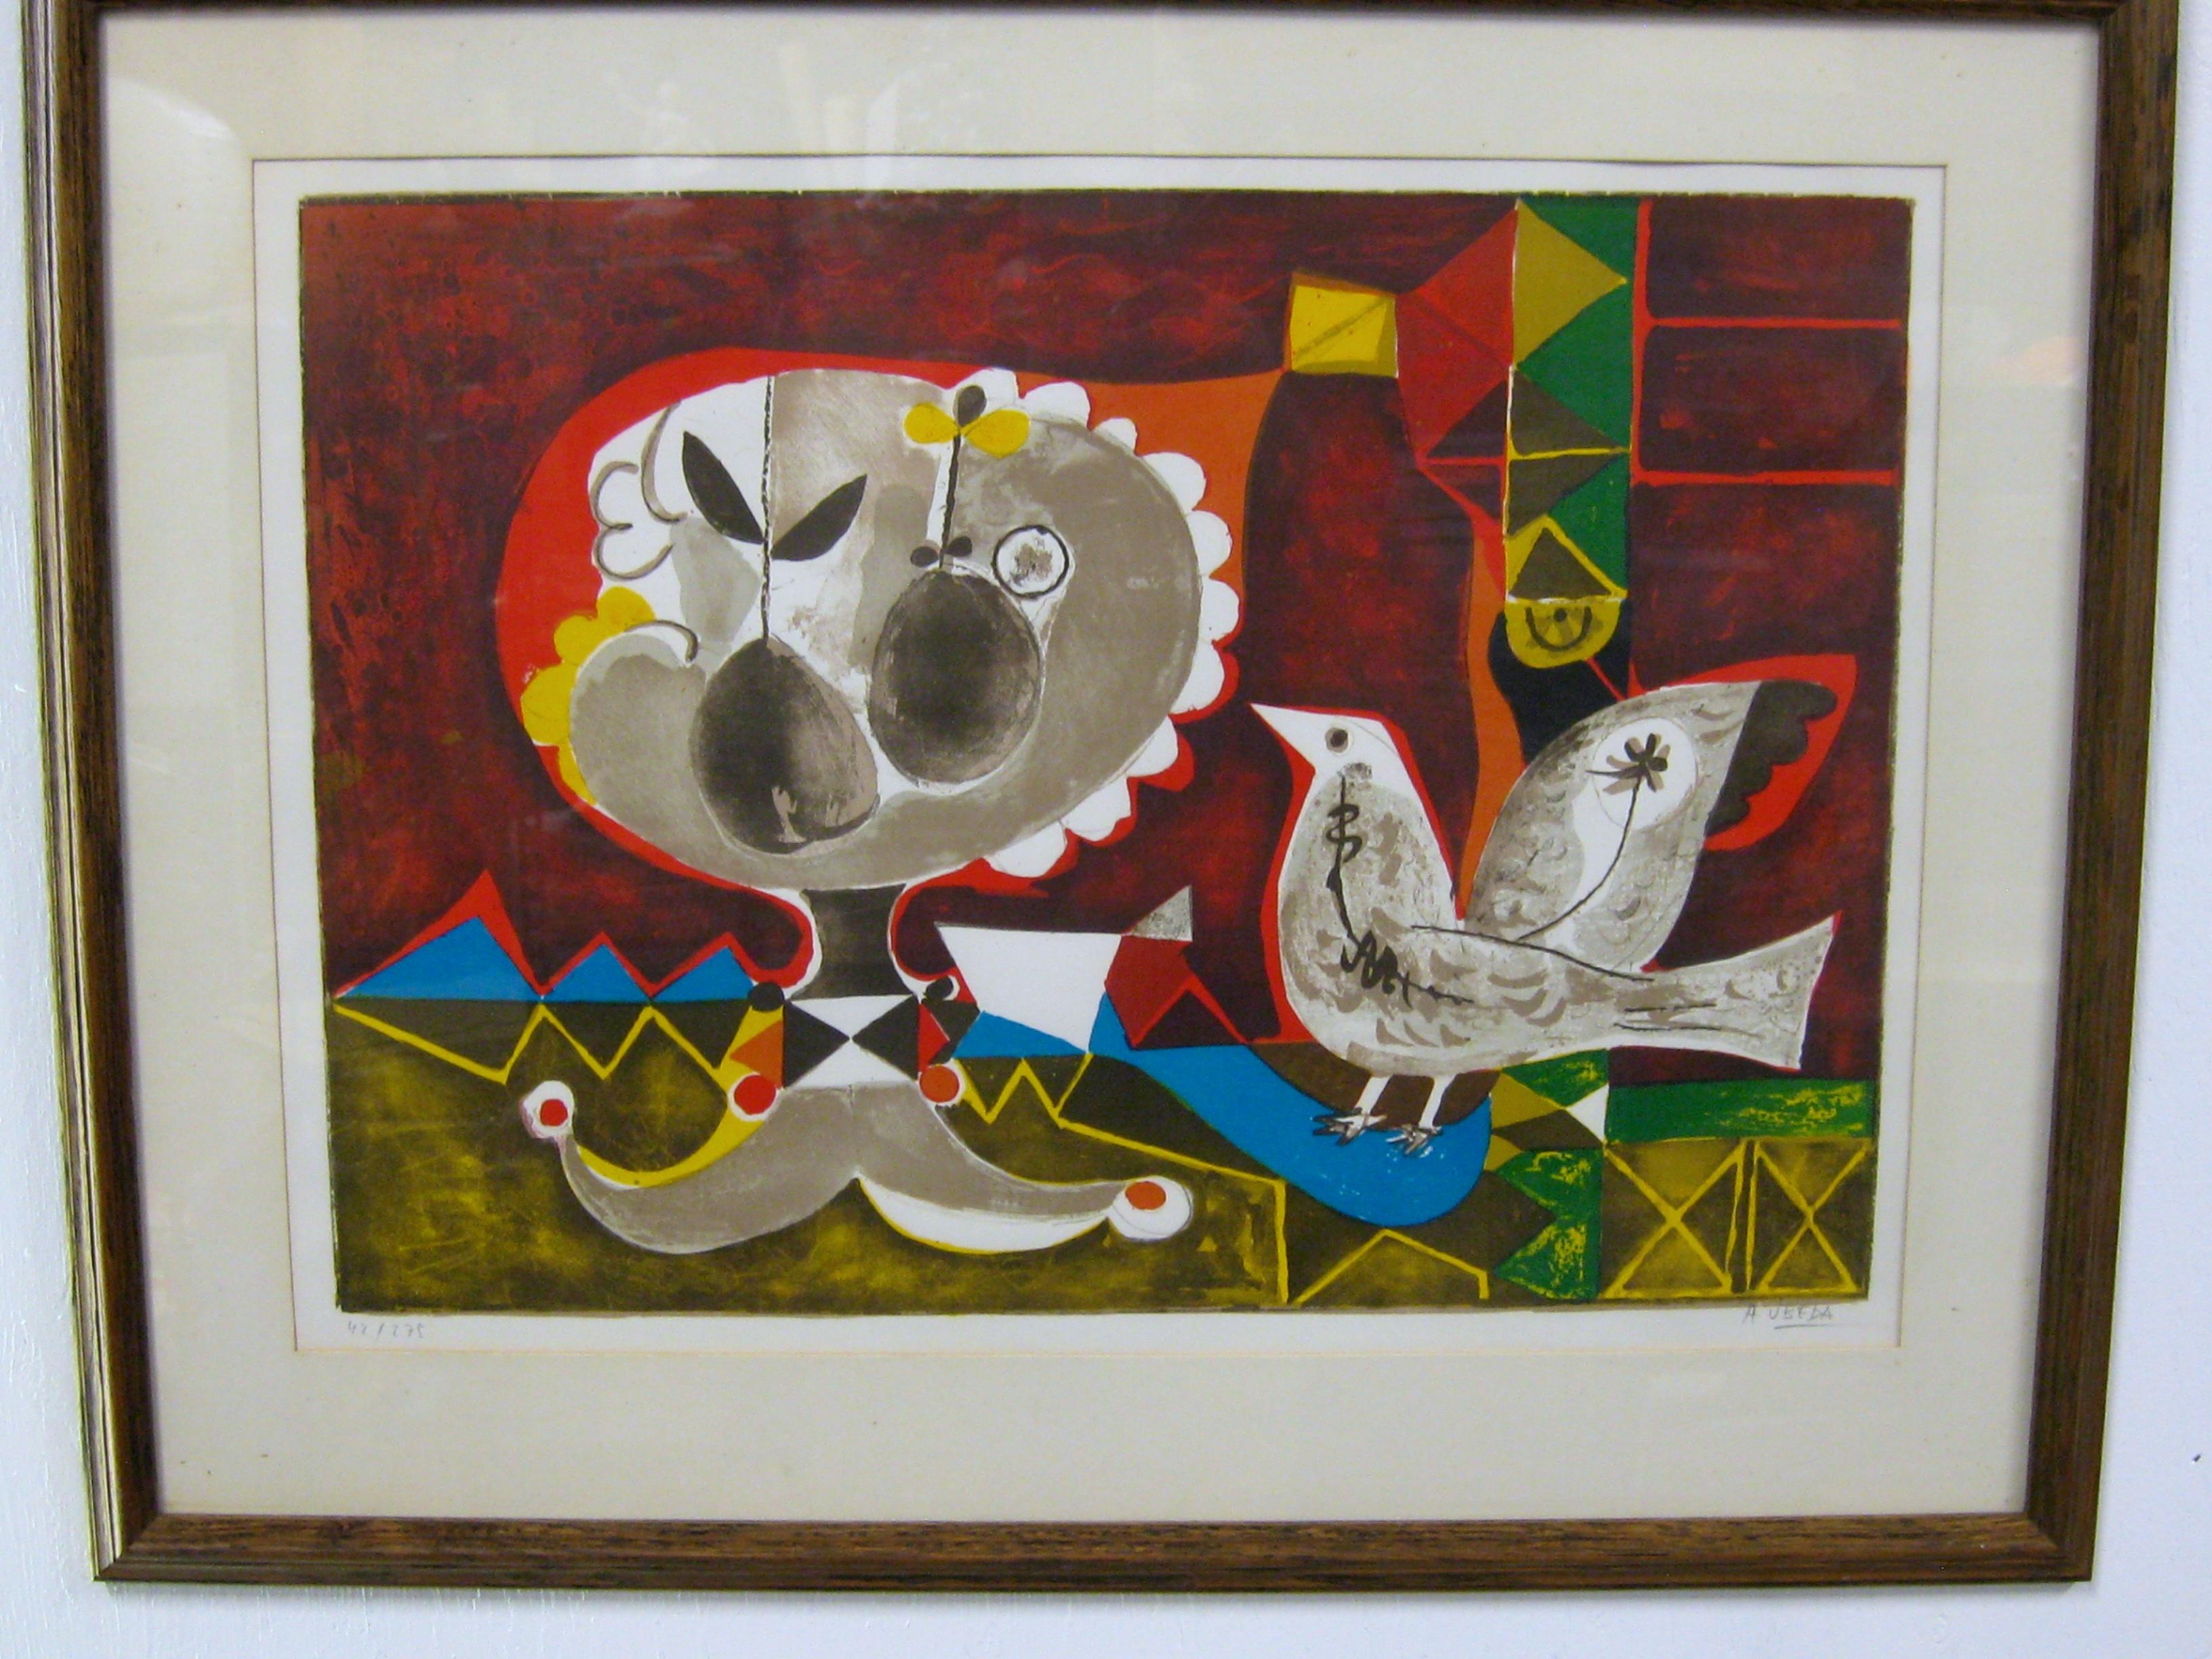 Wonderful hand signed and numbered whimsical lithograph by listed Spanish artist Augustin Ubeda circa 1970's. The lithograph features a colorful bird and fruit. Vibrant colors. The art was sold through The Collector’s Guild in New York City. Comes